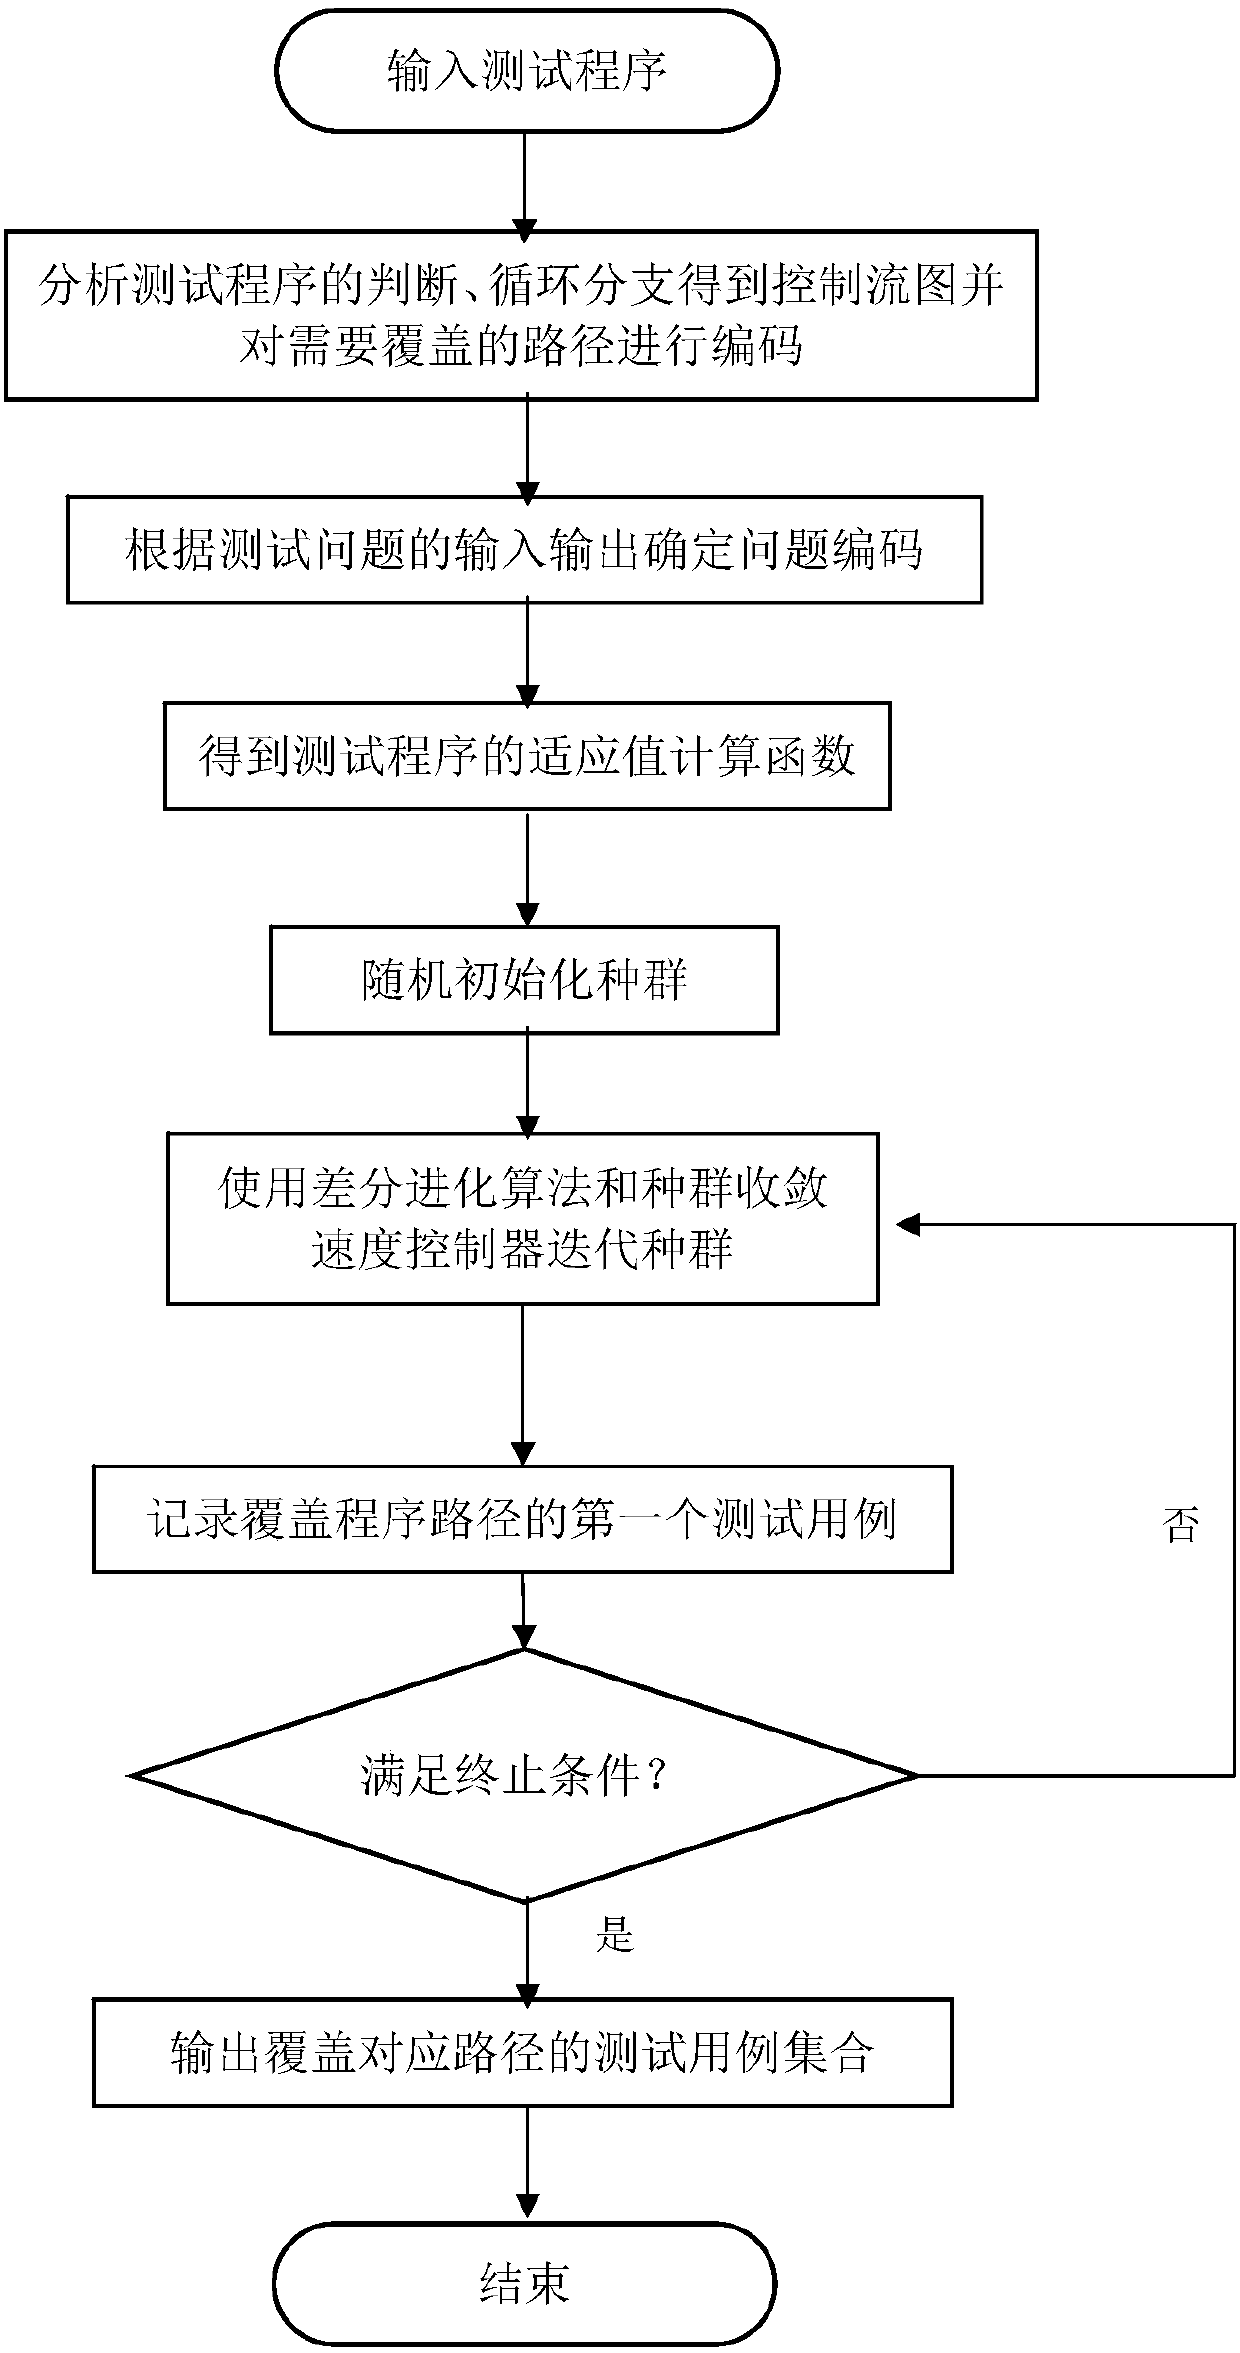 Path coverage software test-based automatic test case generation method